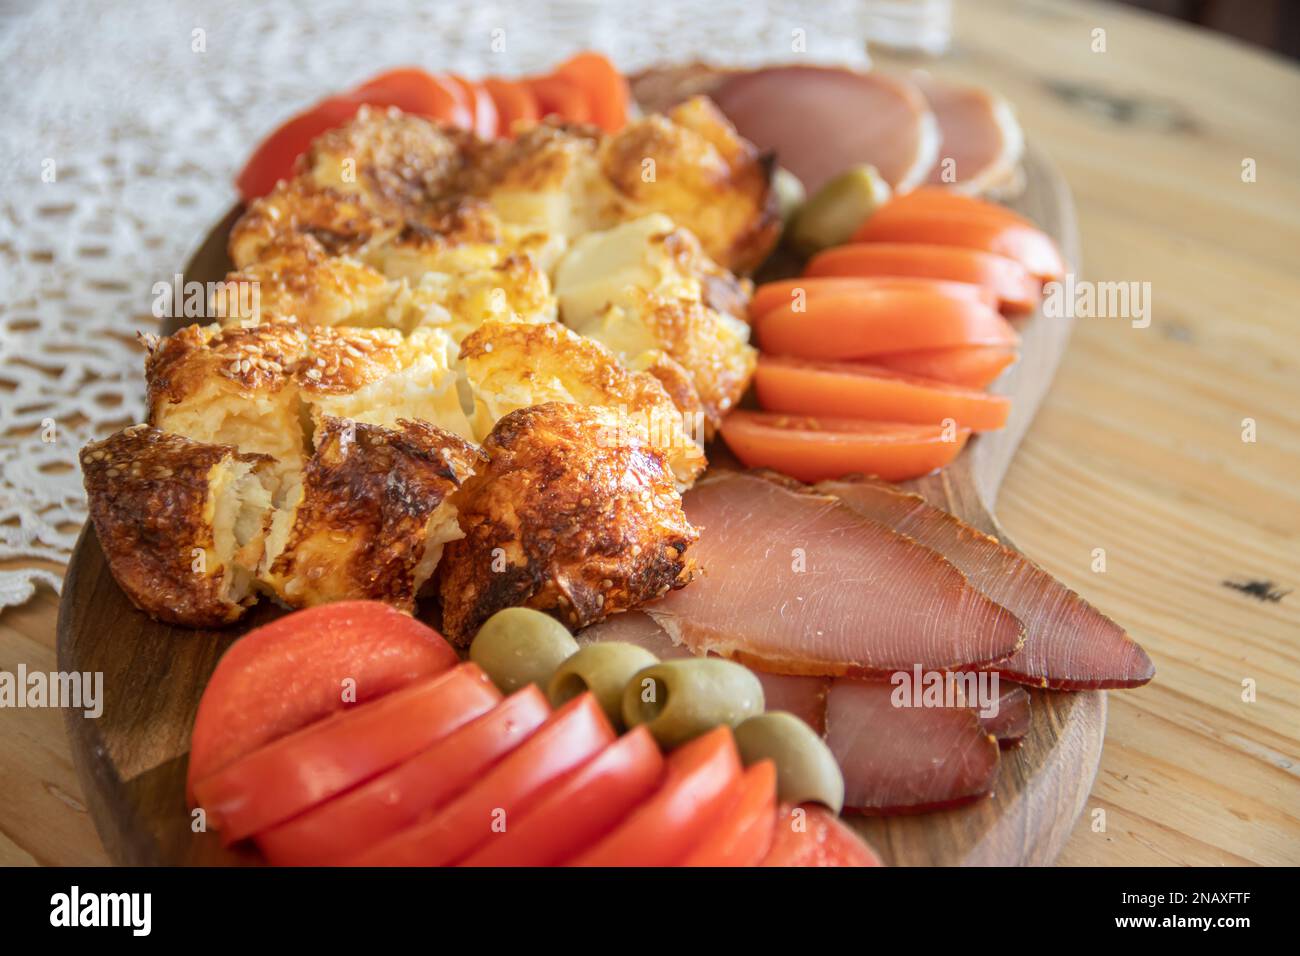 Serbian traditional food plate contain beef and pork smoked dried meet, cheese, vegetables and proja bread made of corn flour , served at wooden plate Stock Photo